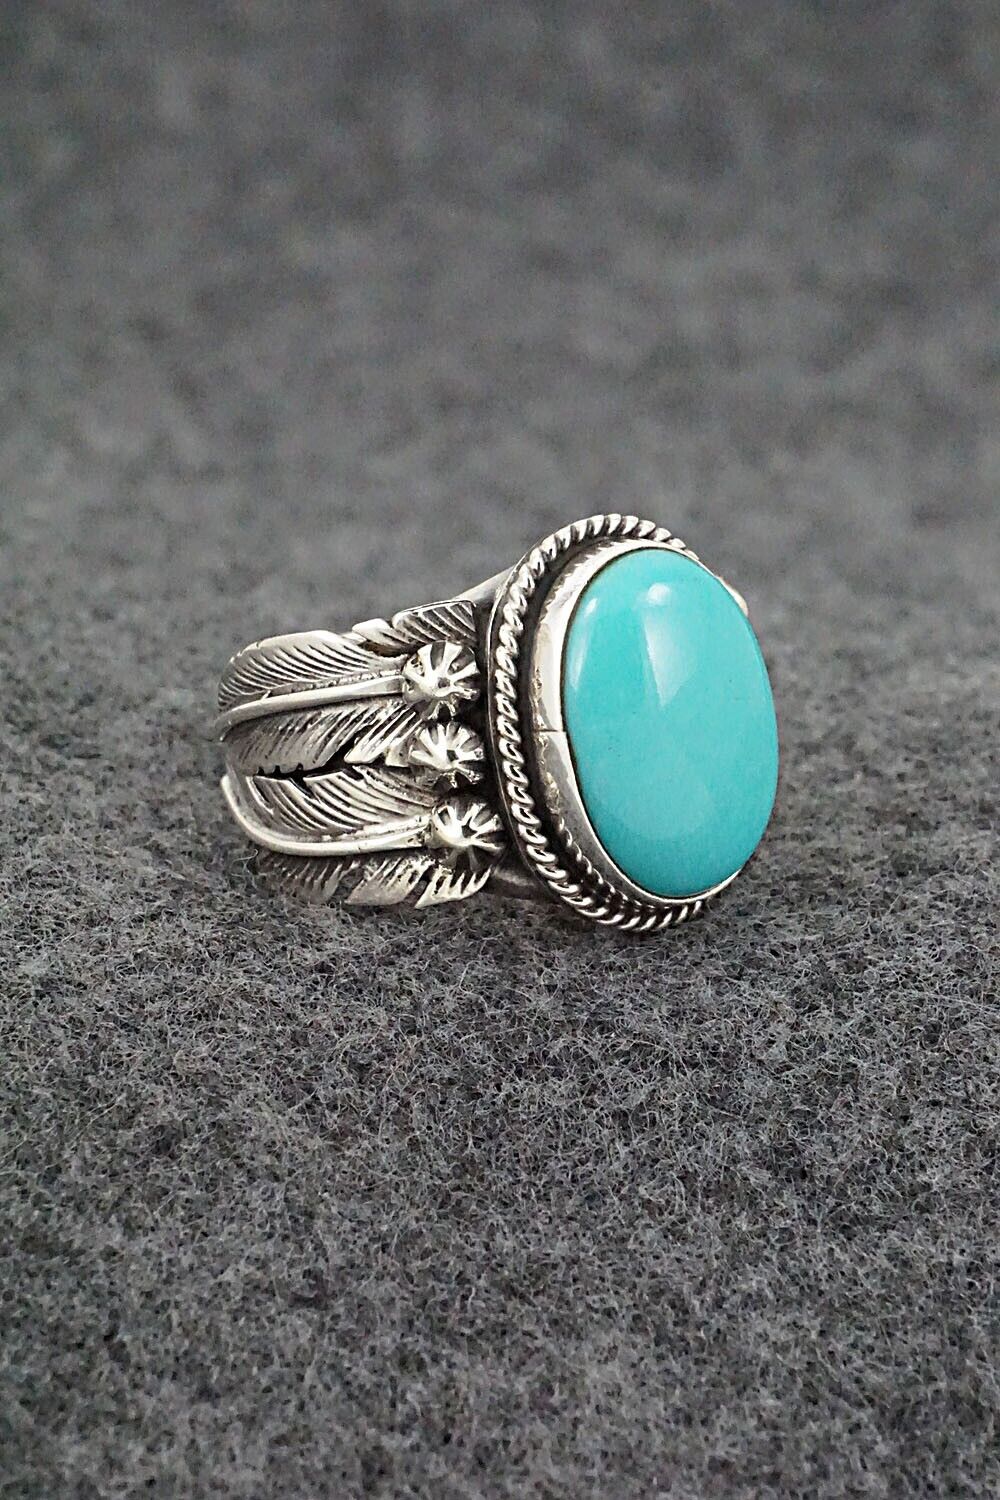 Turquoise & Sterling Silver Ring - Bobby Platero - Size 7.75